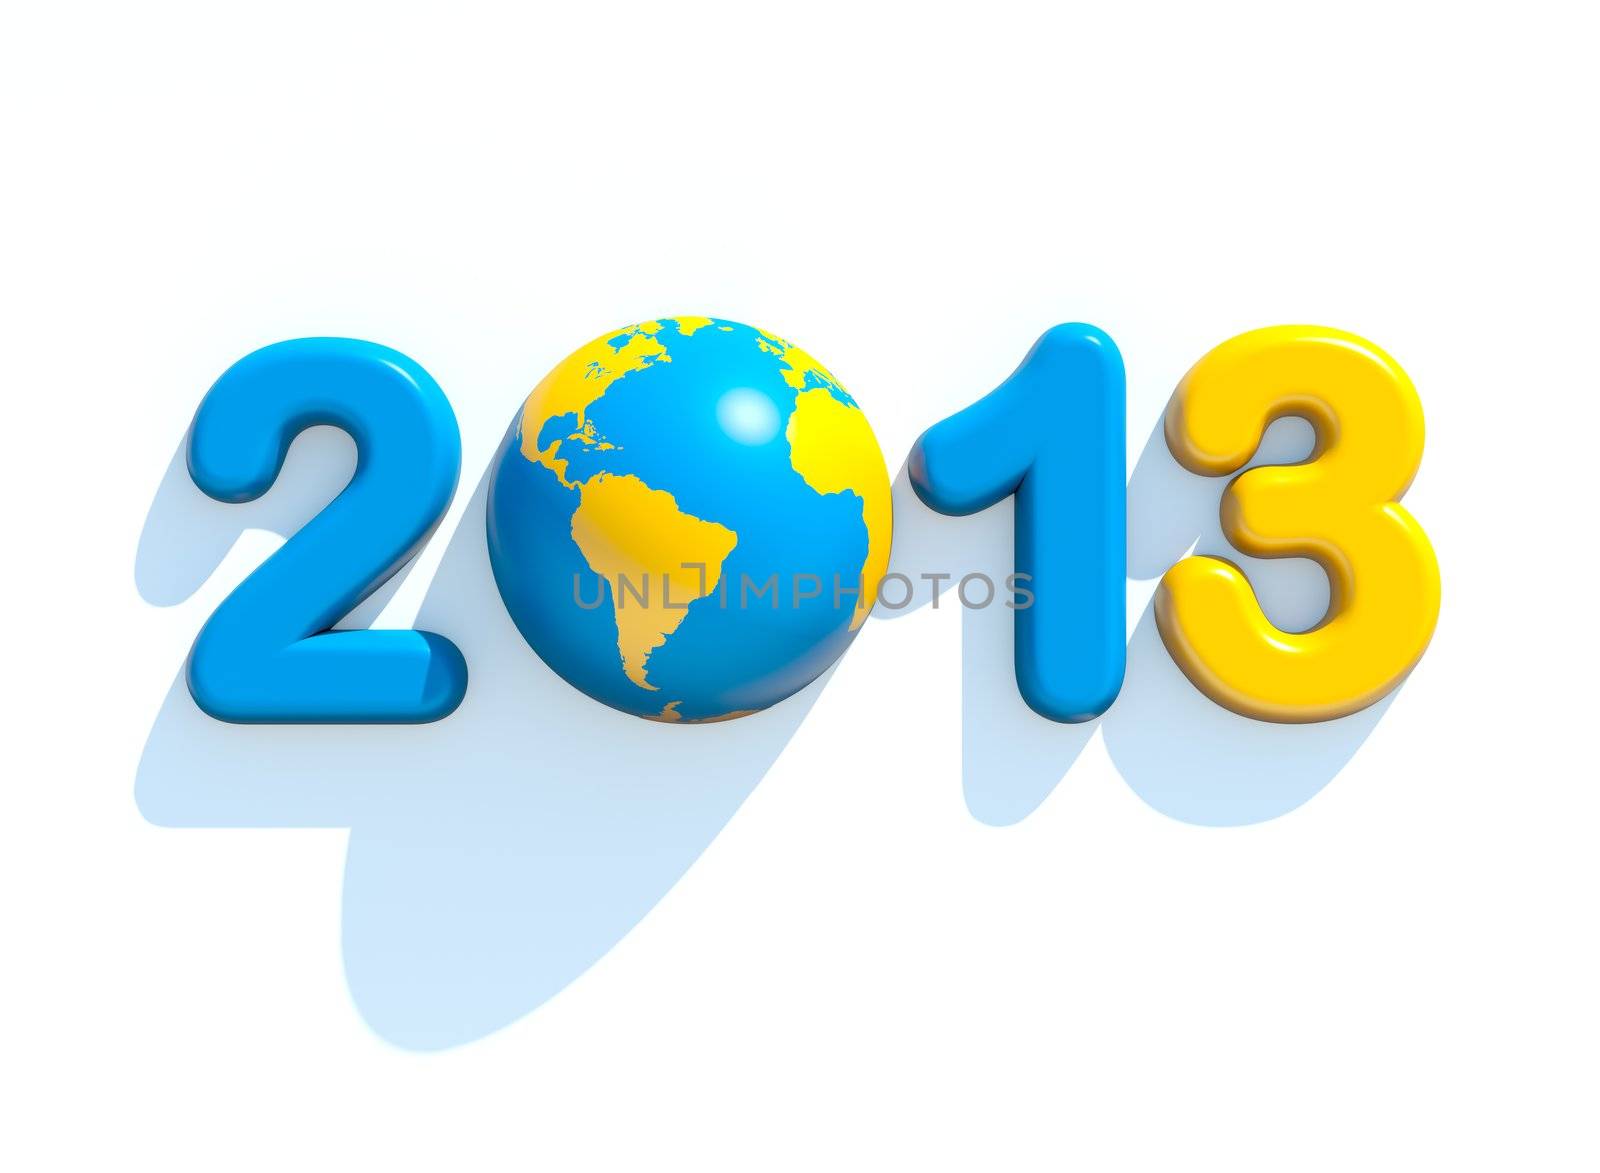 New year 2013 3d shape on white background with glossy globe